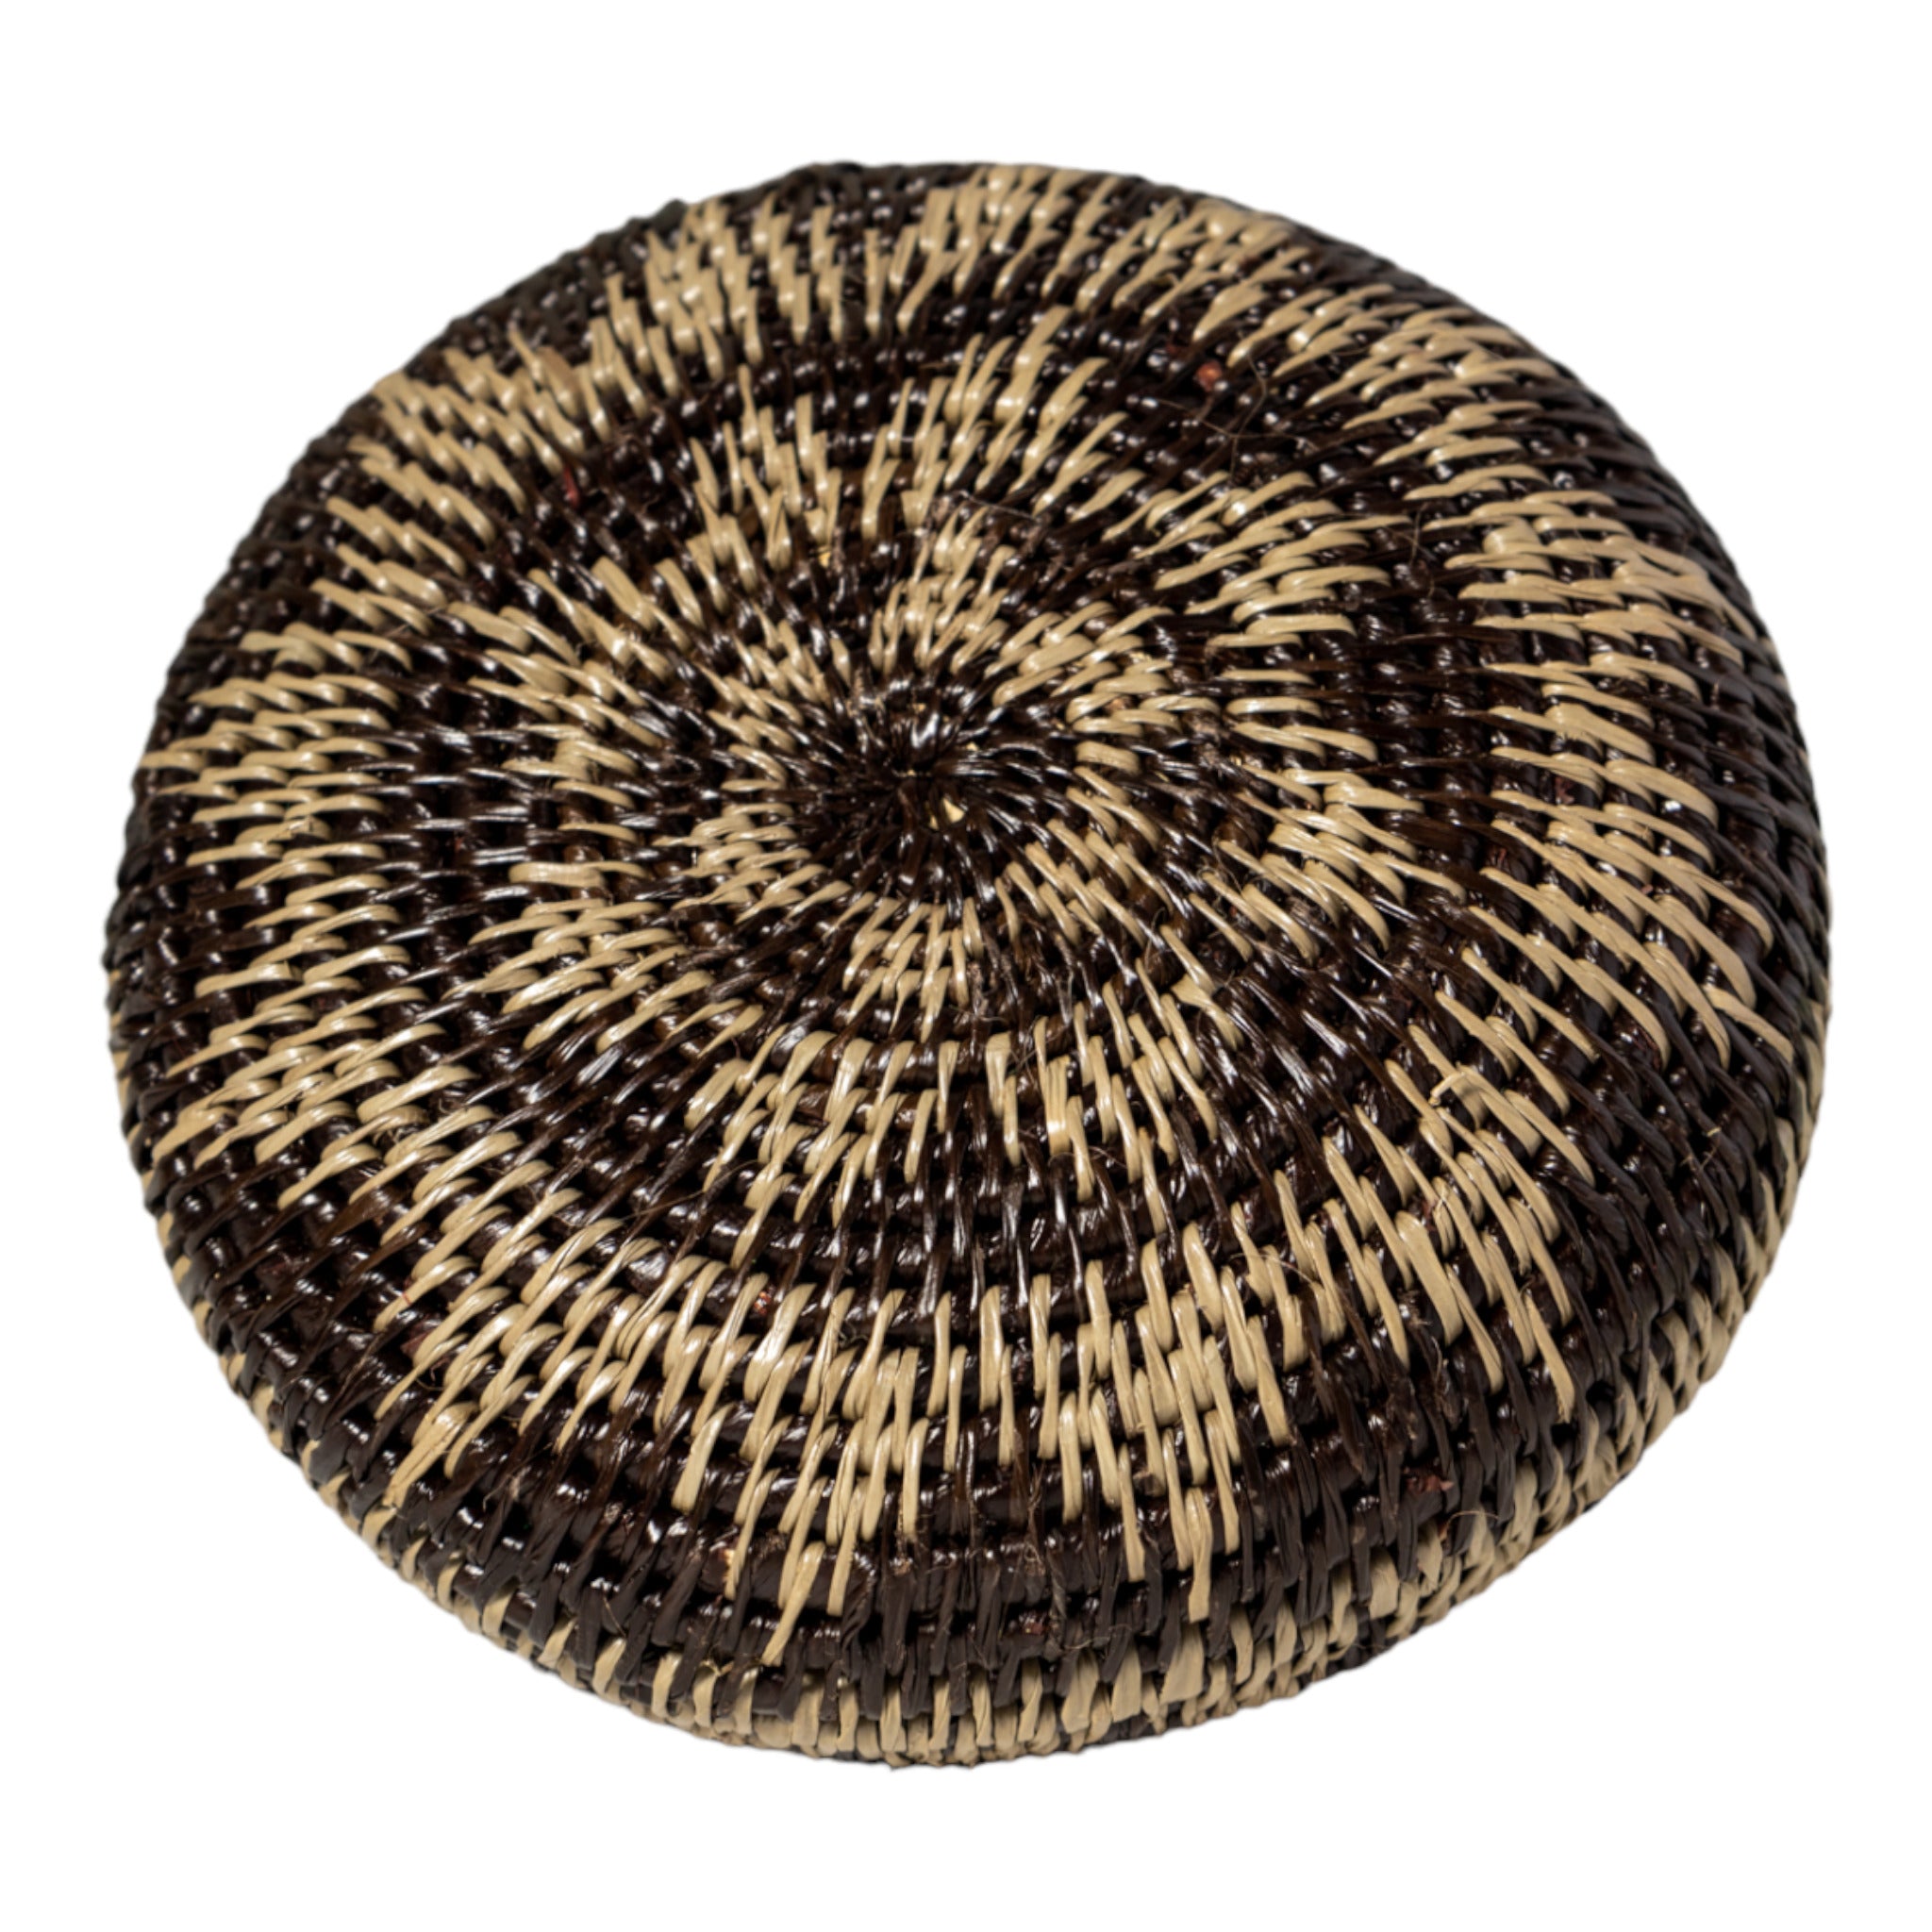 Serene Rainforest Woven Basket With Top